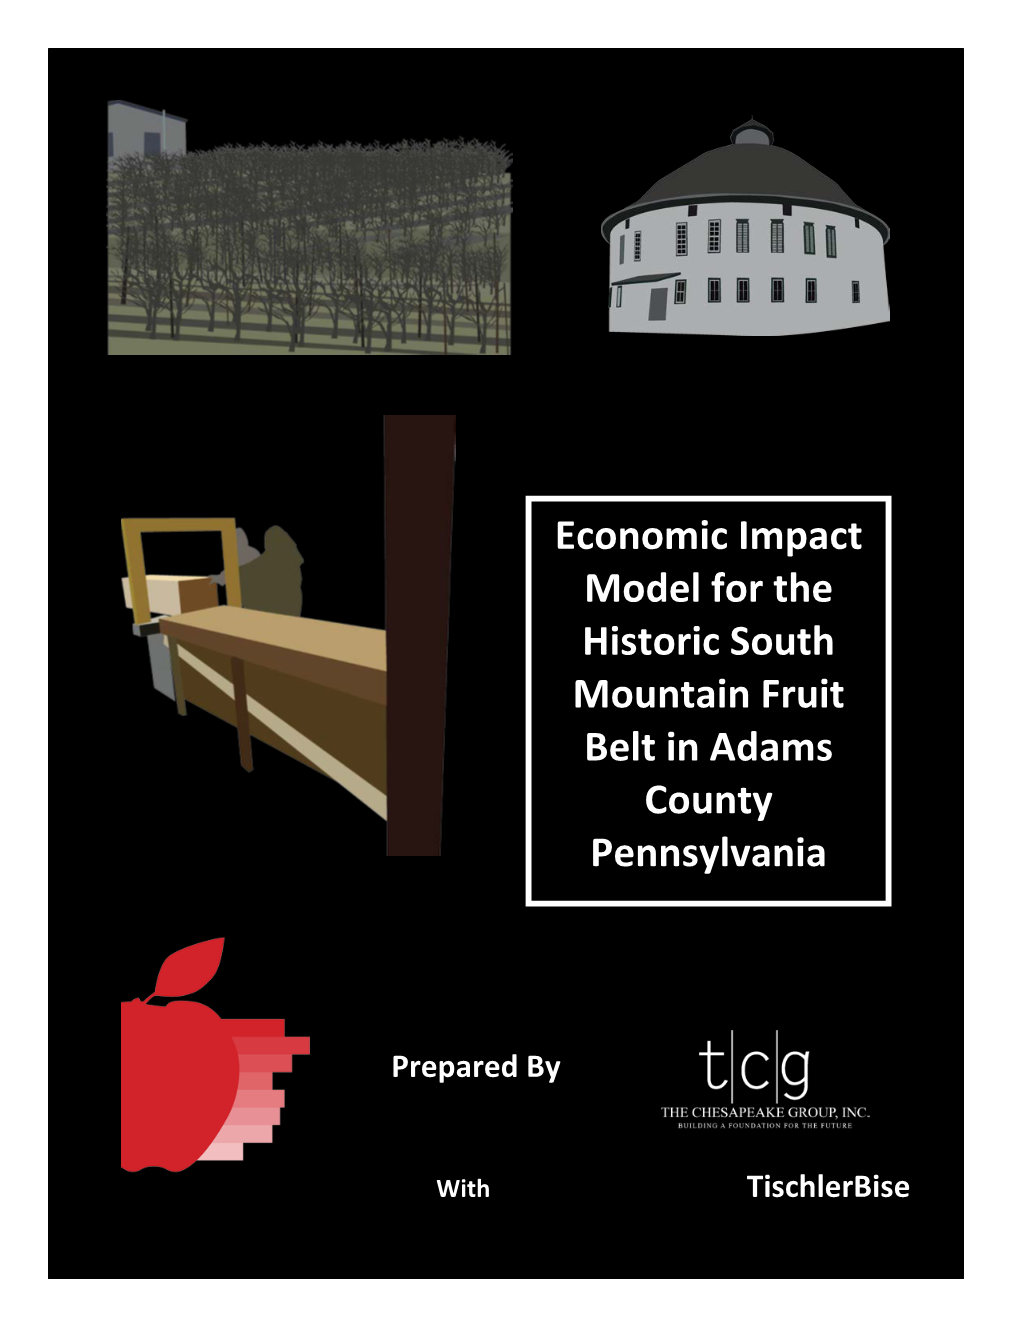 Economic Impact Model for the Historic South Mountain Fruit Belt in Adams County Pennsylvania